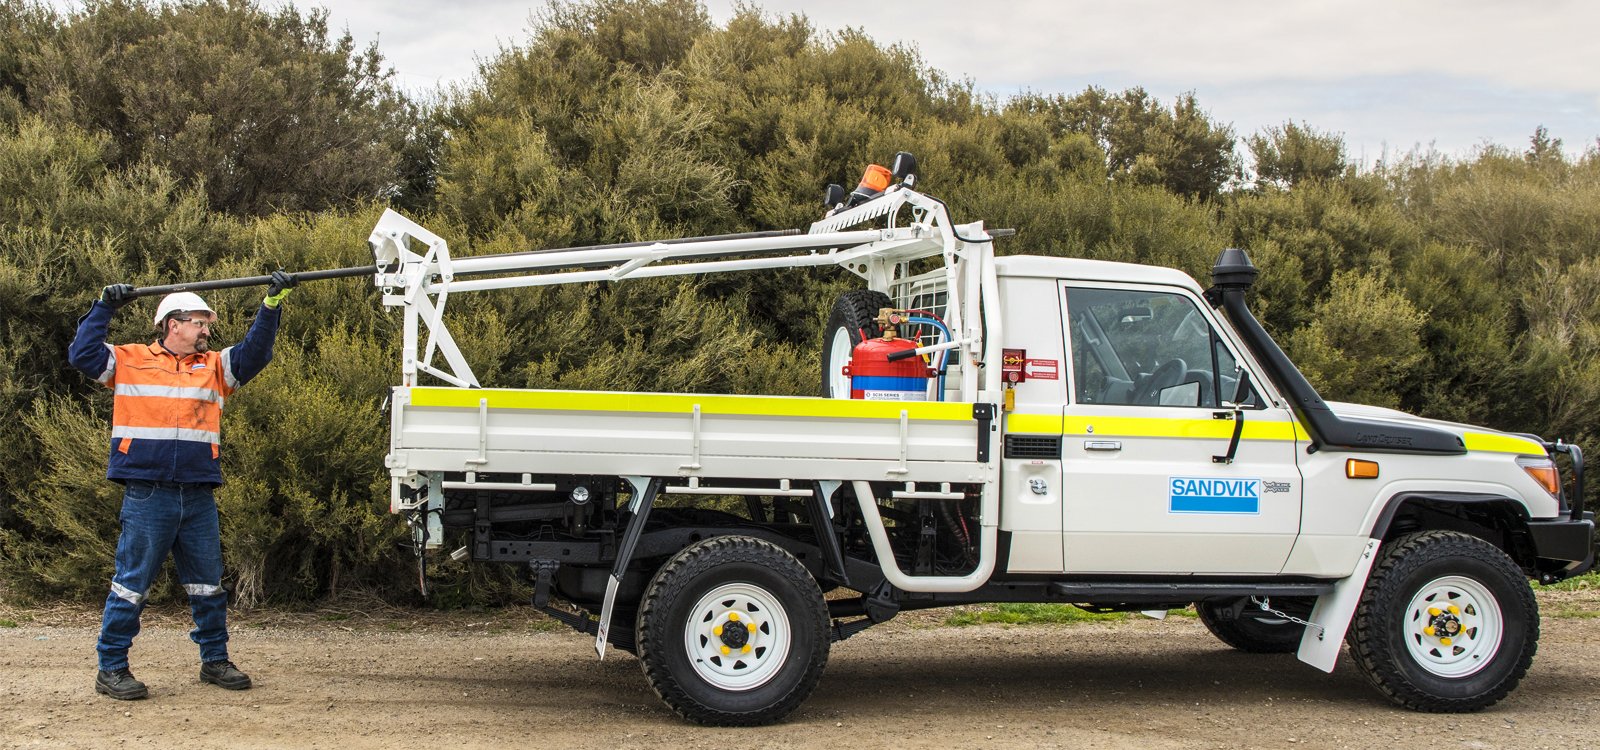 <p>The new design enables personnel to safely transport drill rods without their sliding around or falling off the vehicle.</p>